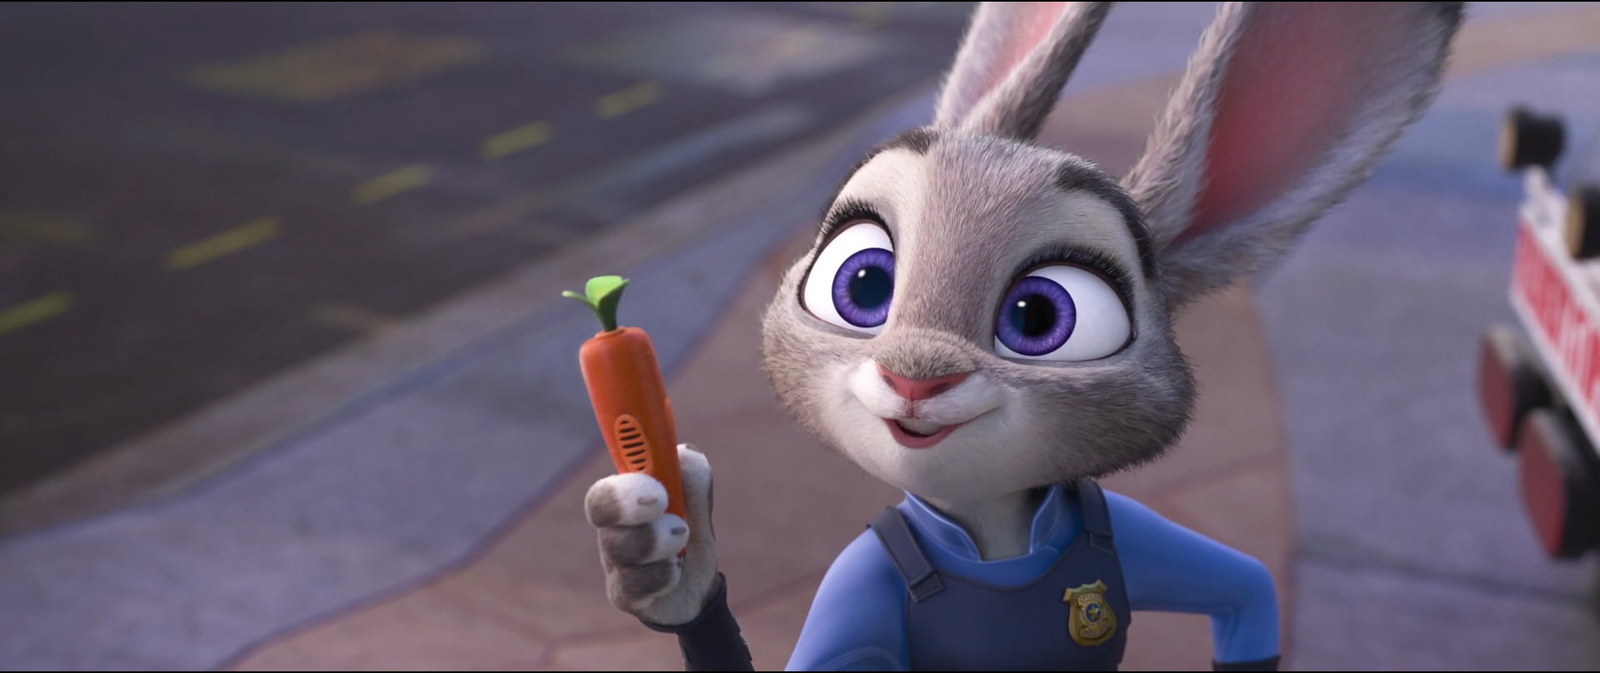 Judy Hopps from Zootopia holds a carrot